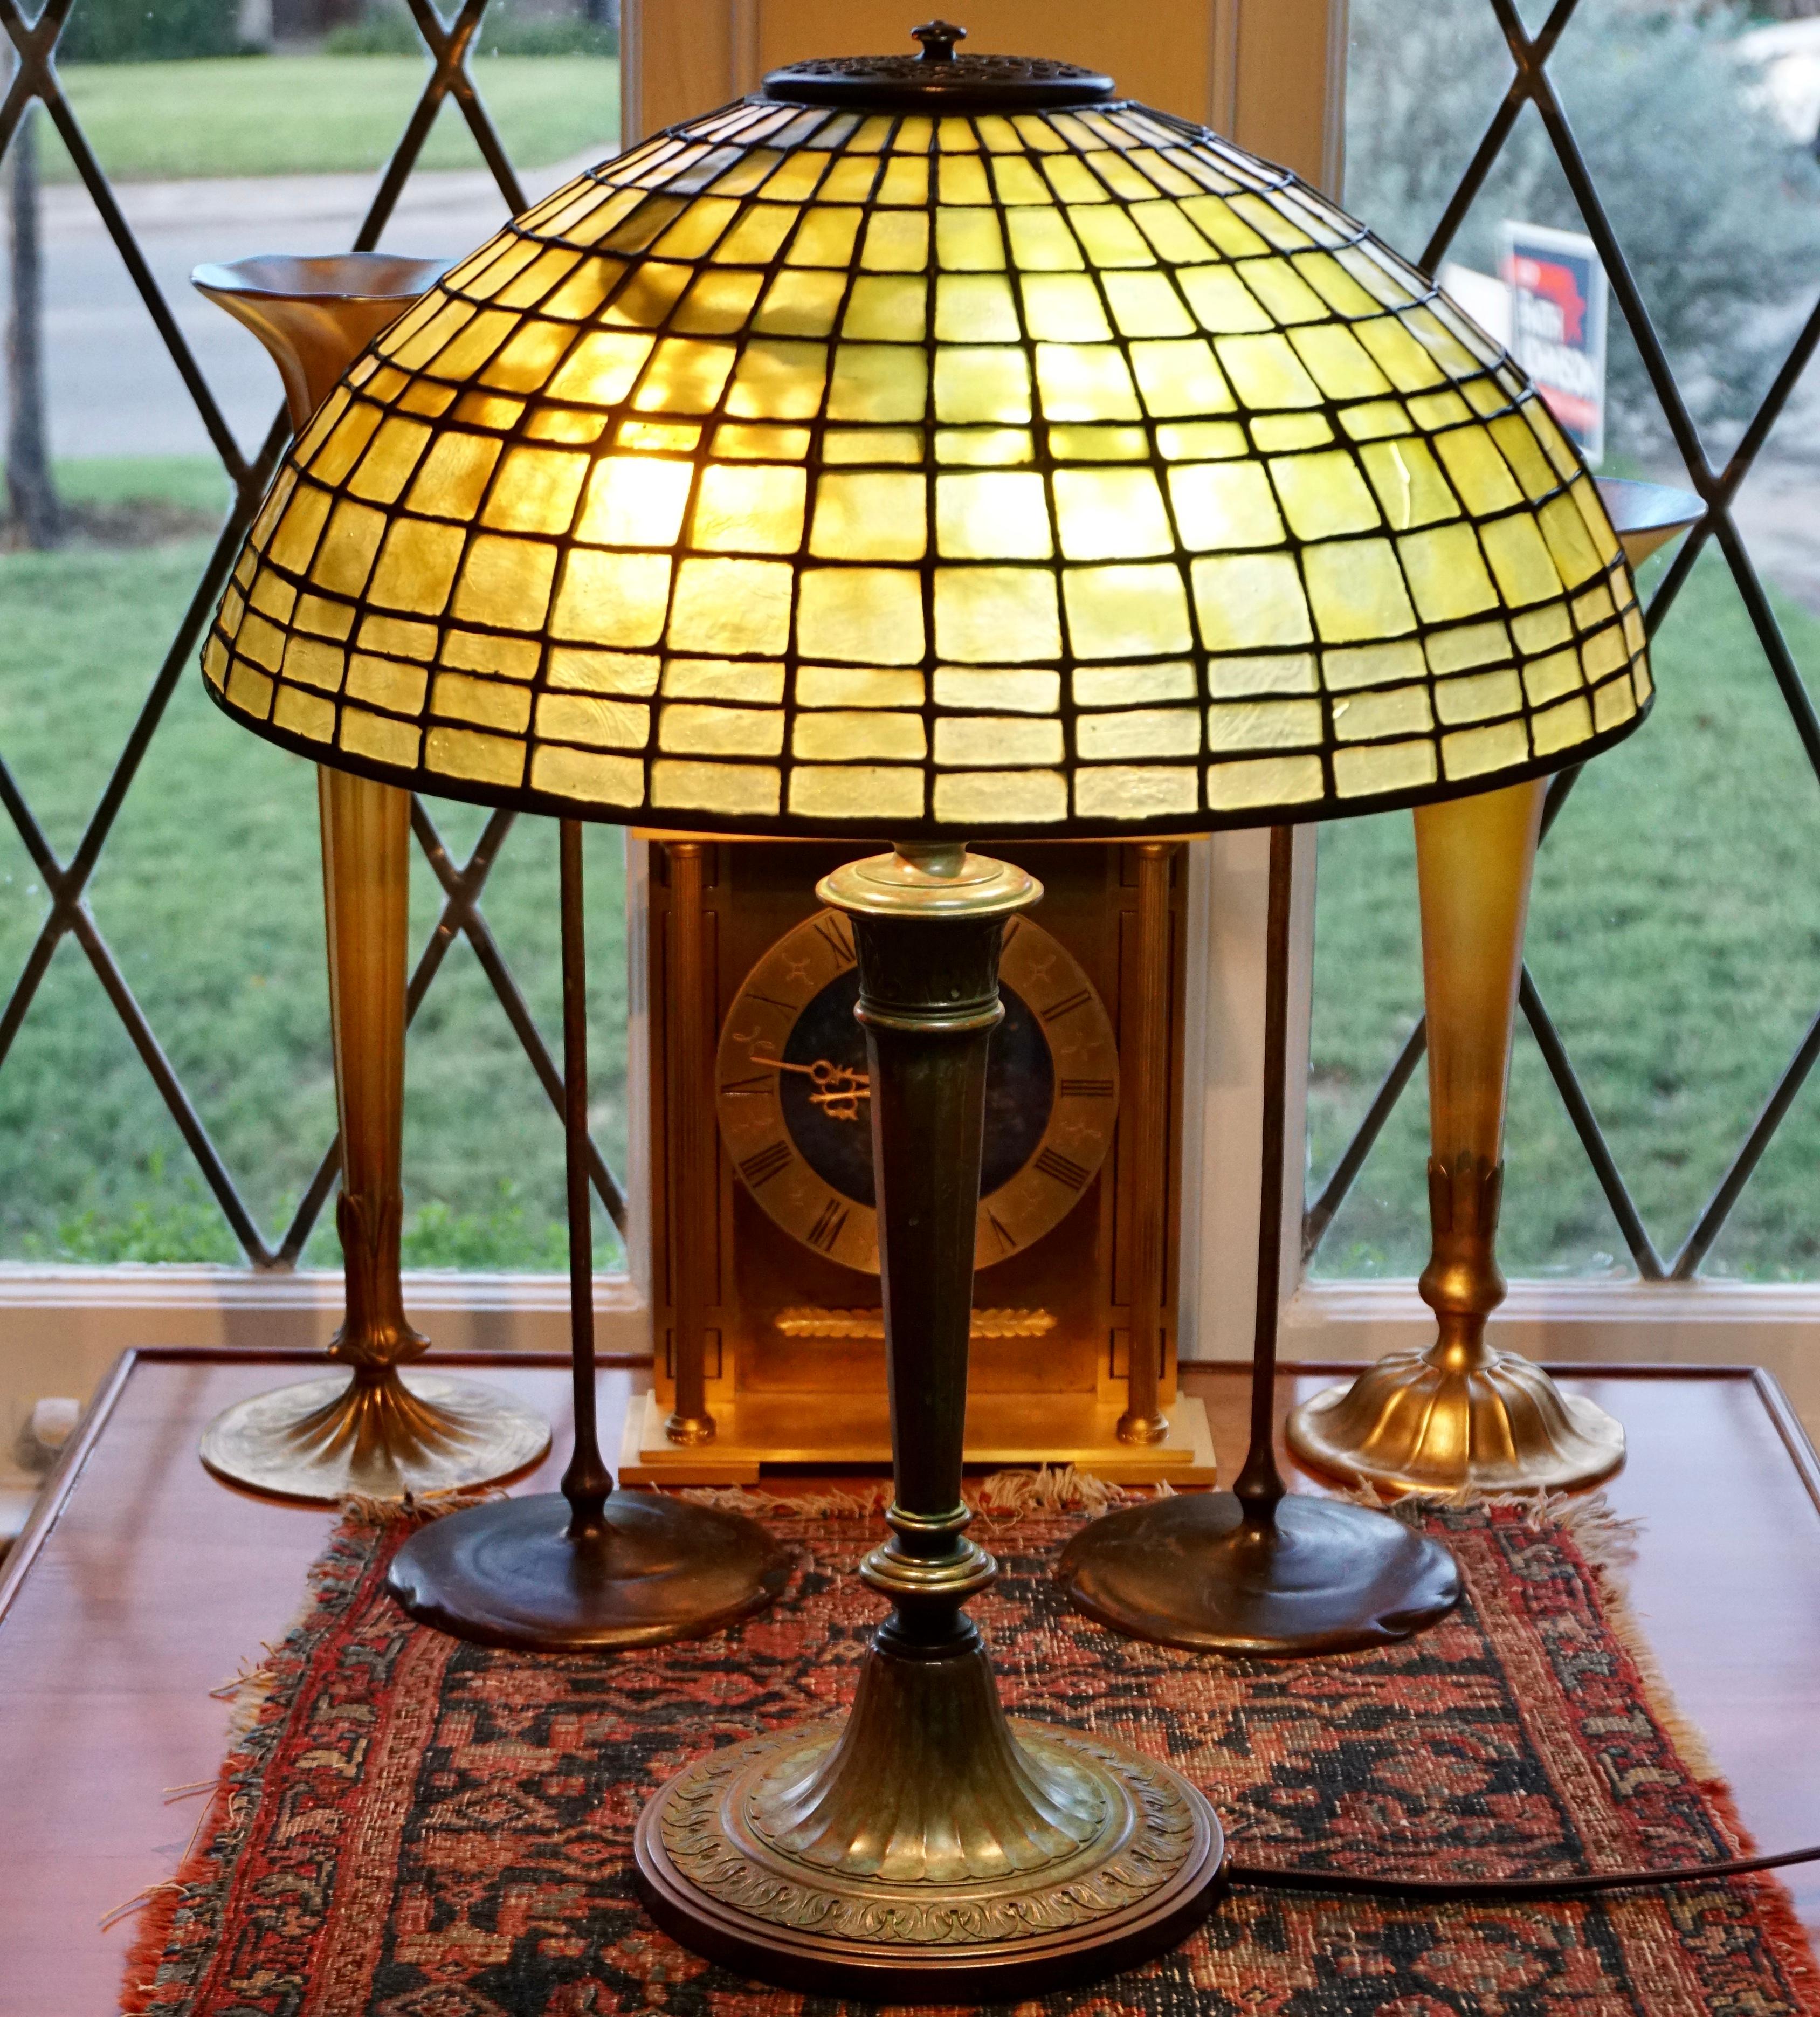 Tiffany Studios New York Art Nouveau Art Deco, circa 1910 bronze and lead glass desk or table lamp. Green unlit and yellow lit diachronic mottled lead glass shade. Sitting on a early bronze neoclasssic lamp base with 3-arm swirling lights with